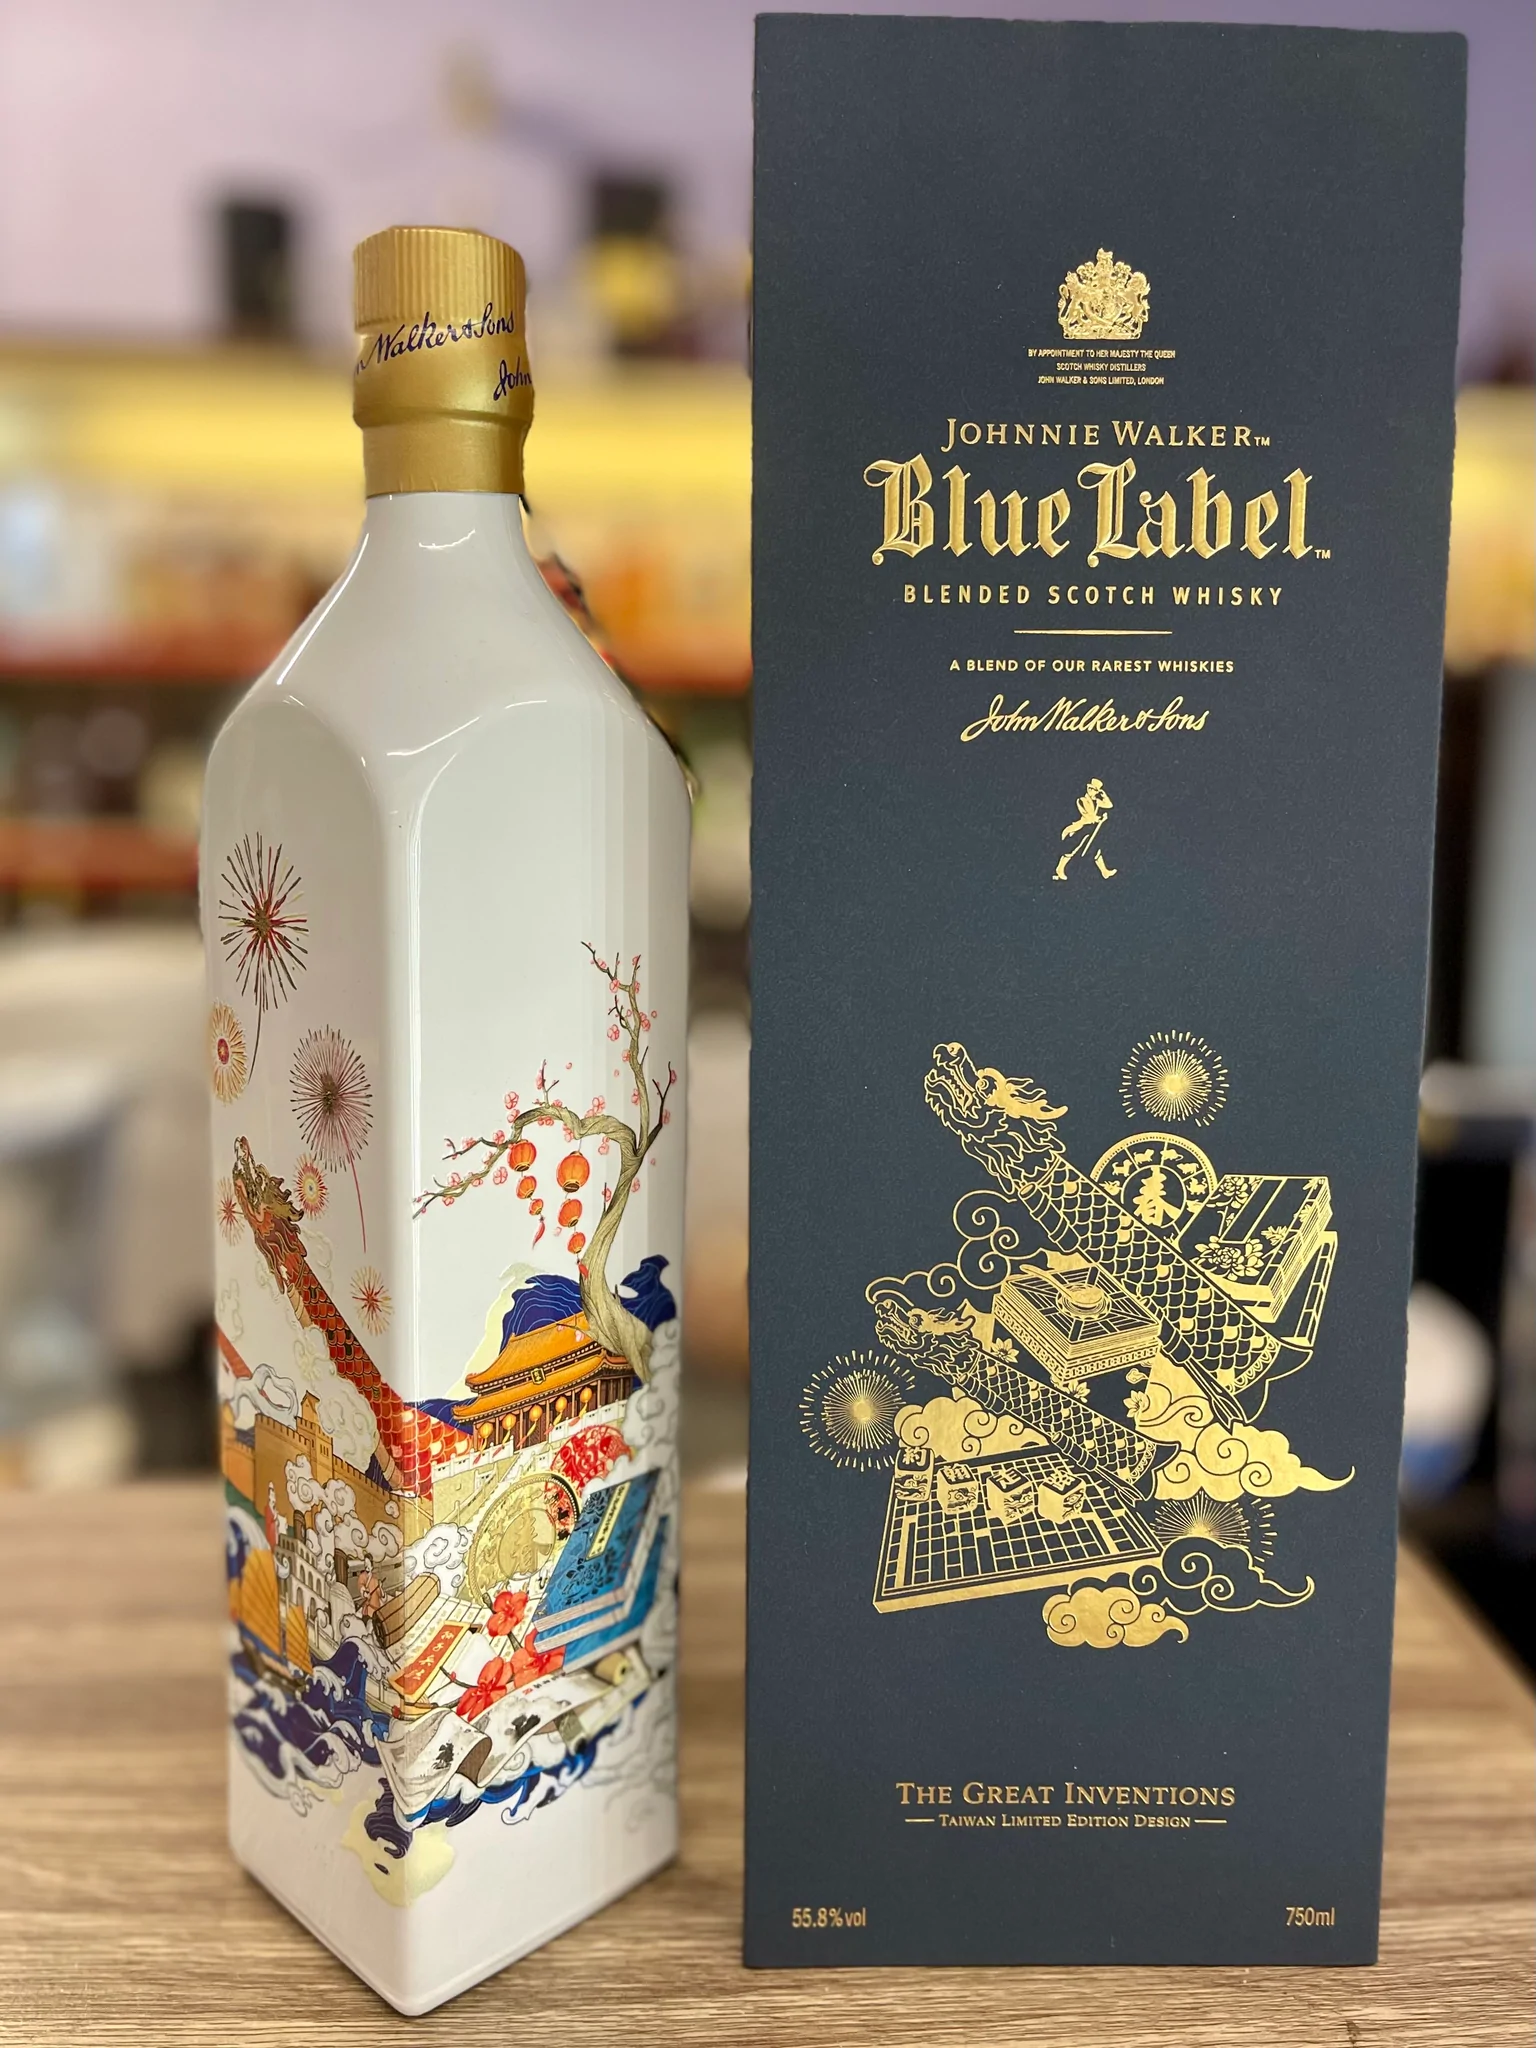 Johnnie Walker Blue Label The Great Inventions - China Limited Edition Blended Scotch Whisky, Scotland